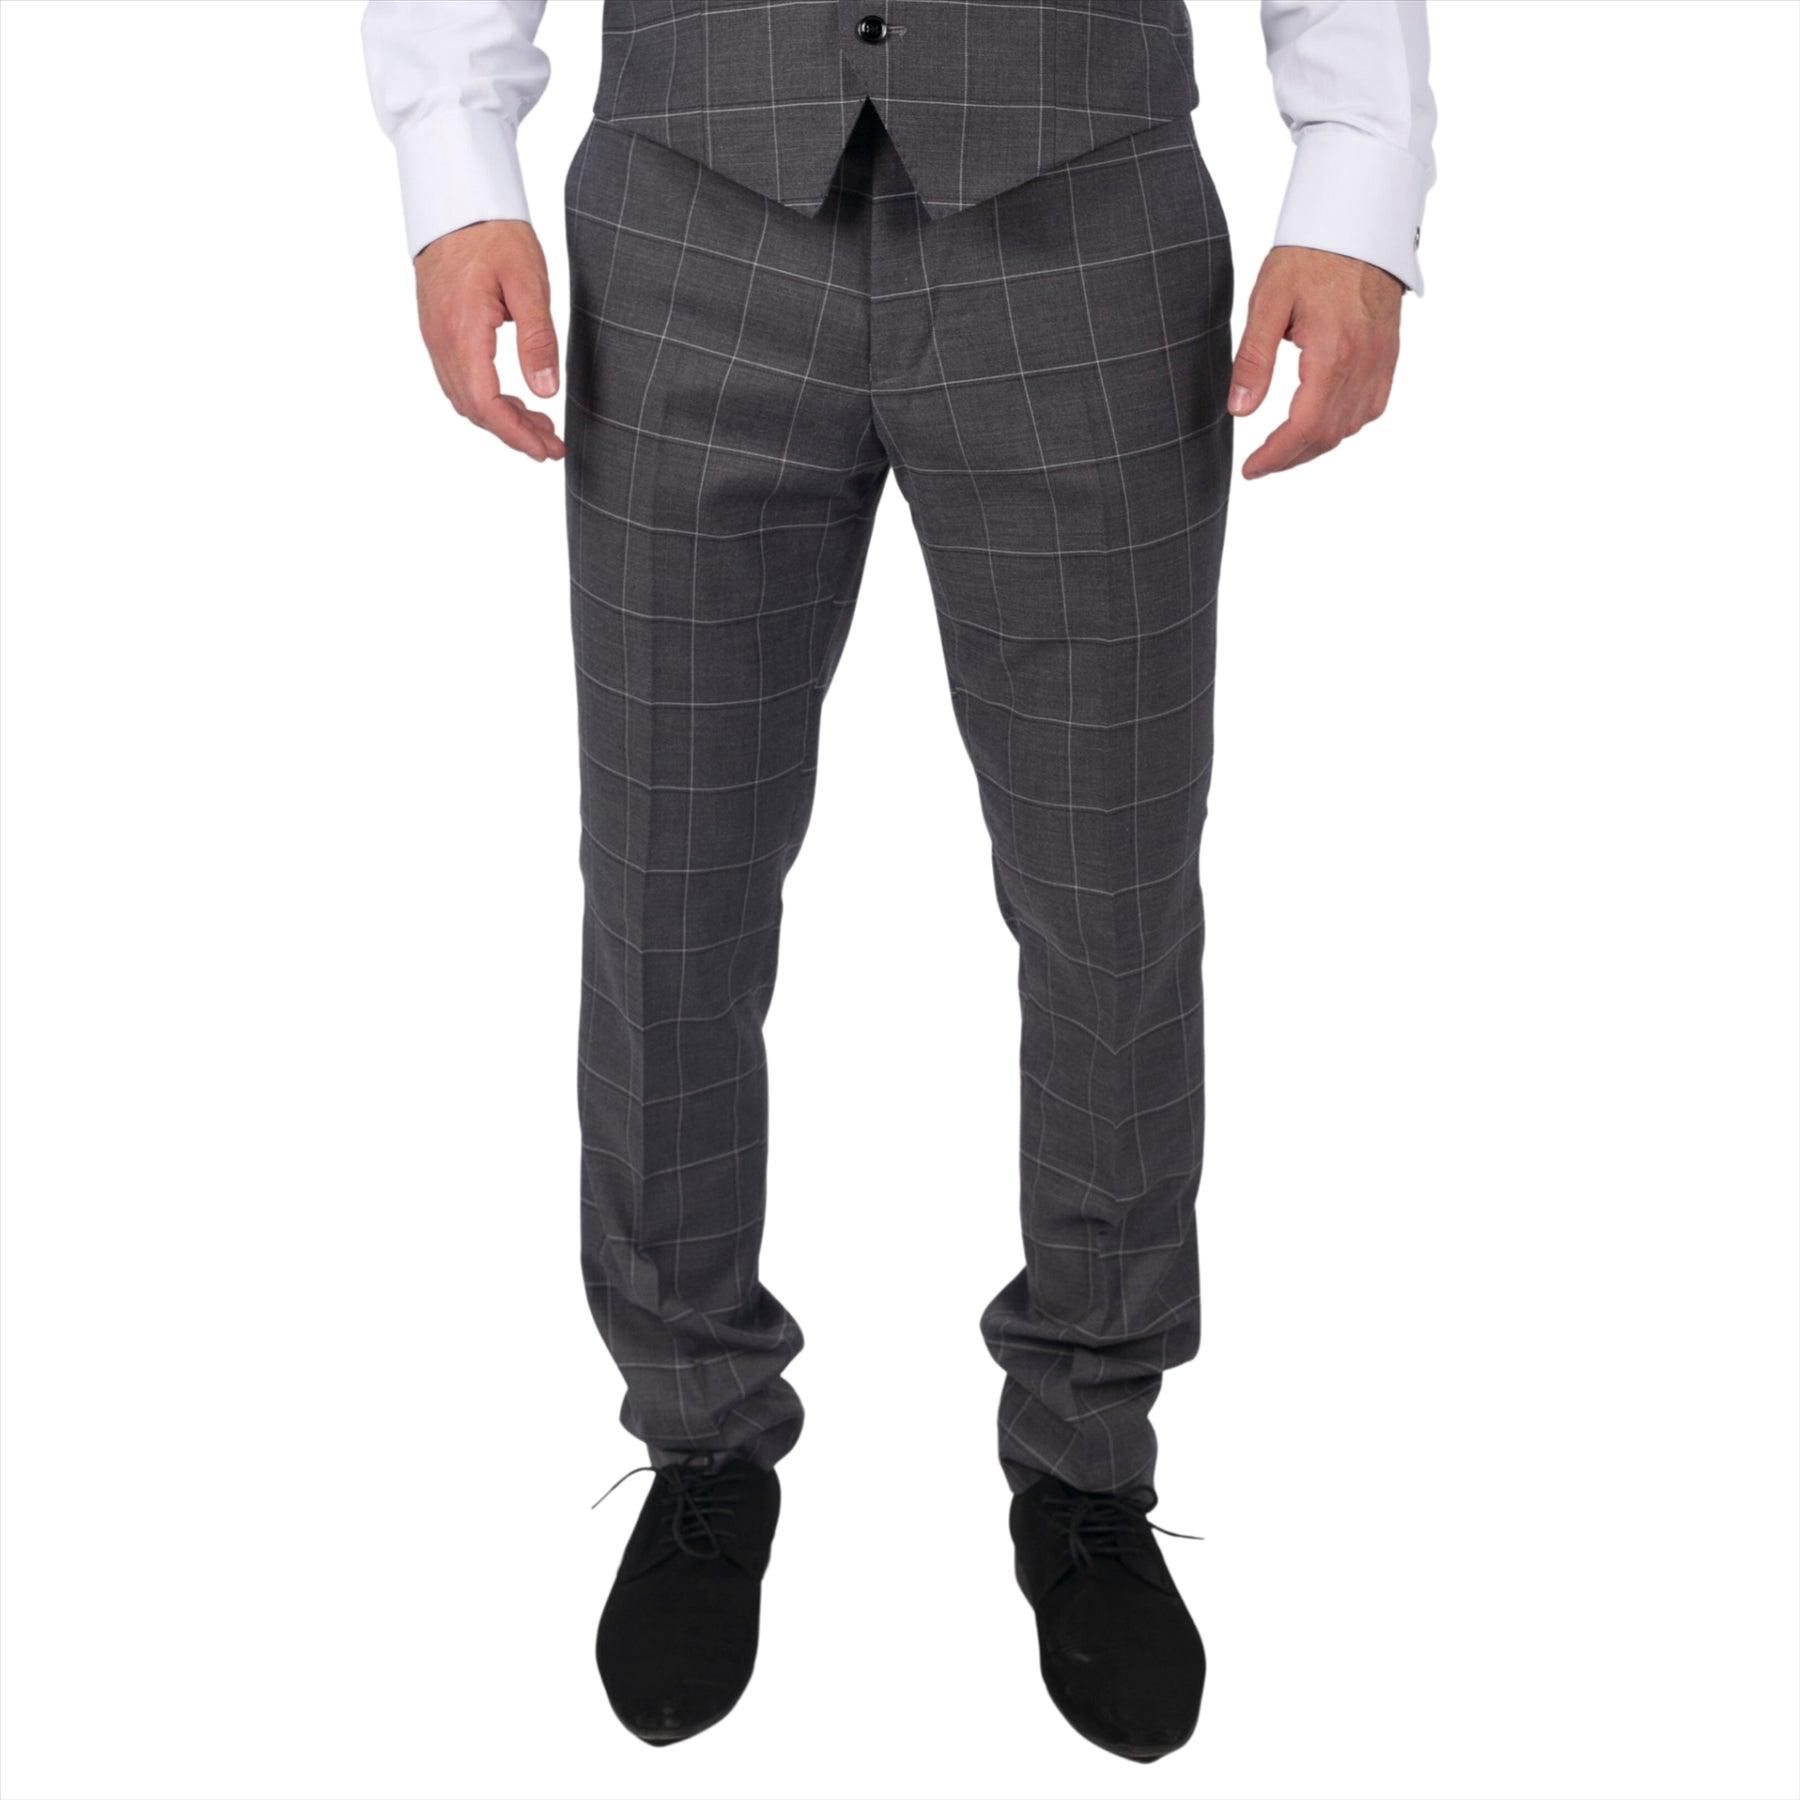 Mens Grey Check Trousers Vintage Retro Smart Wedding Classic Tailored Fit Light - Knighthood Store